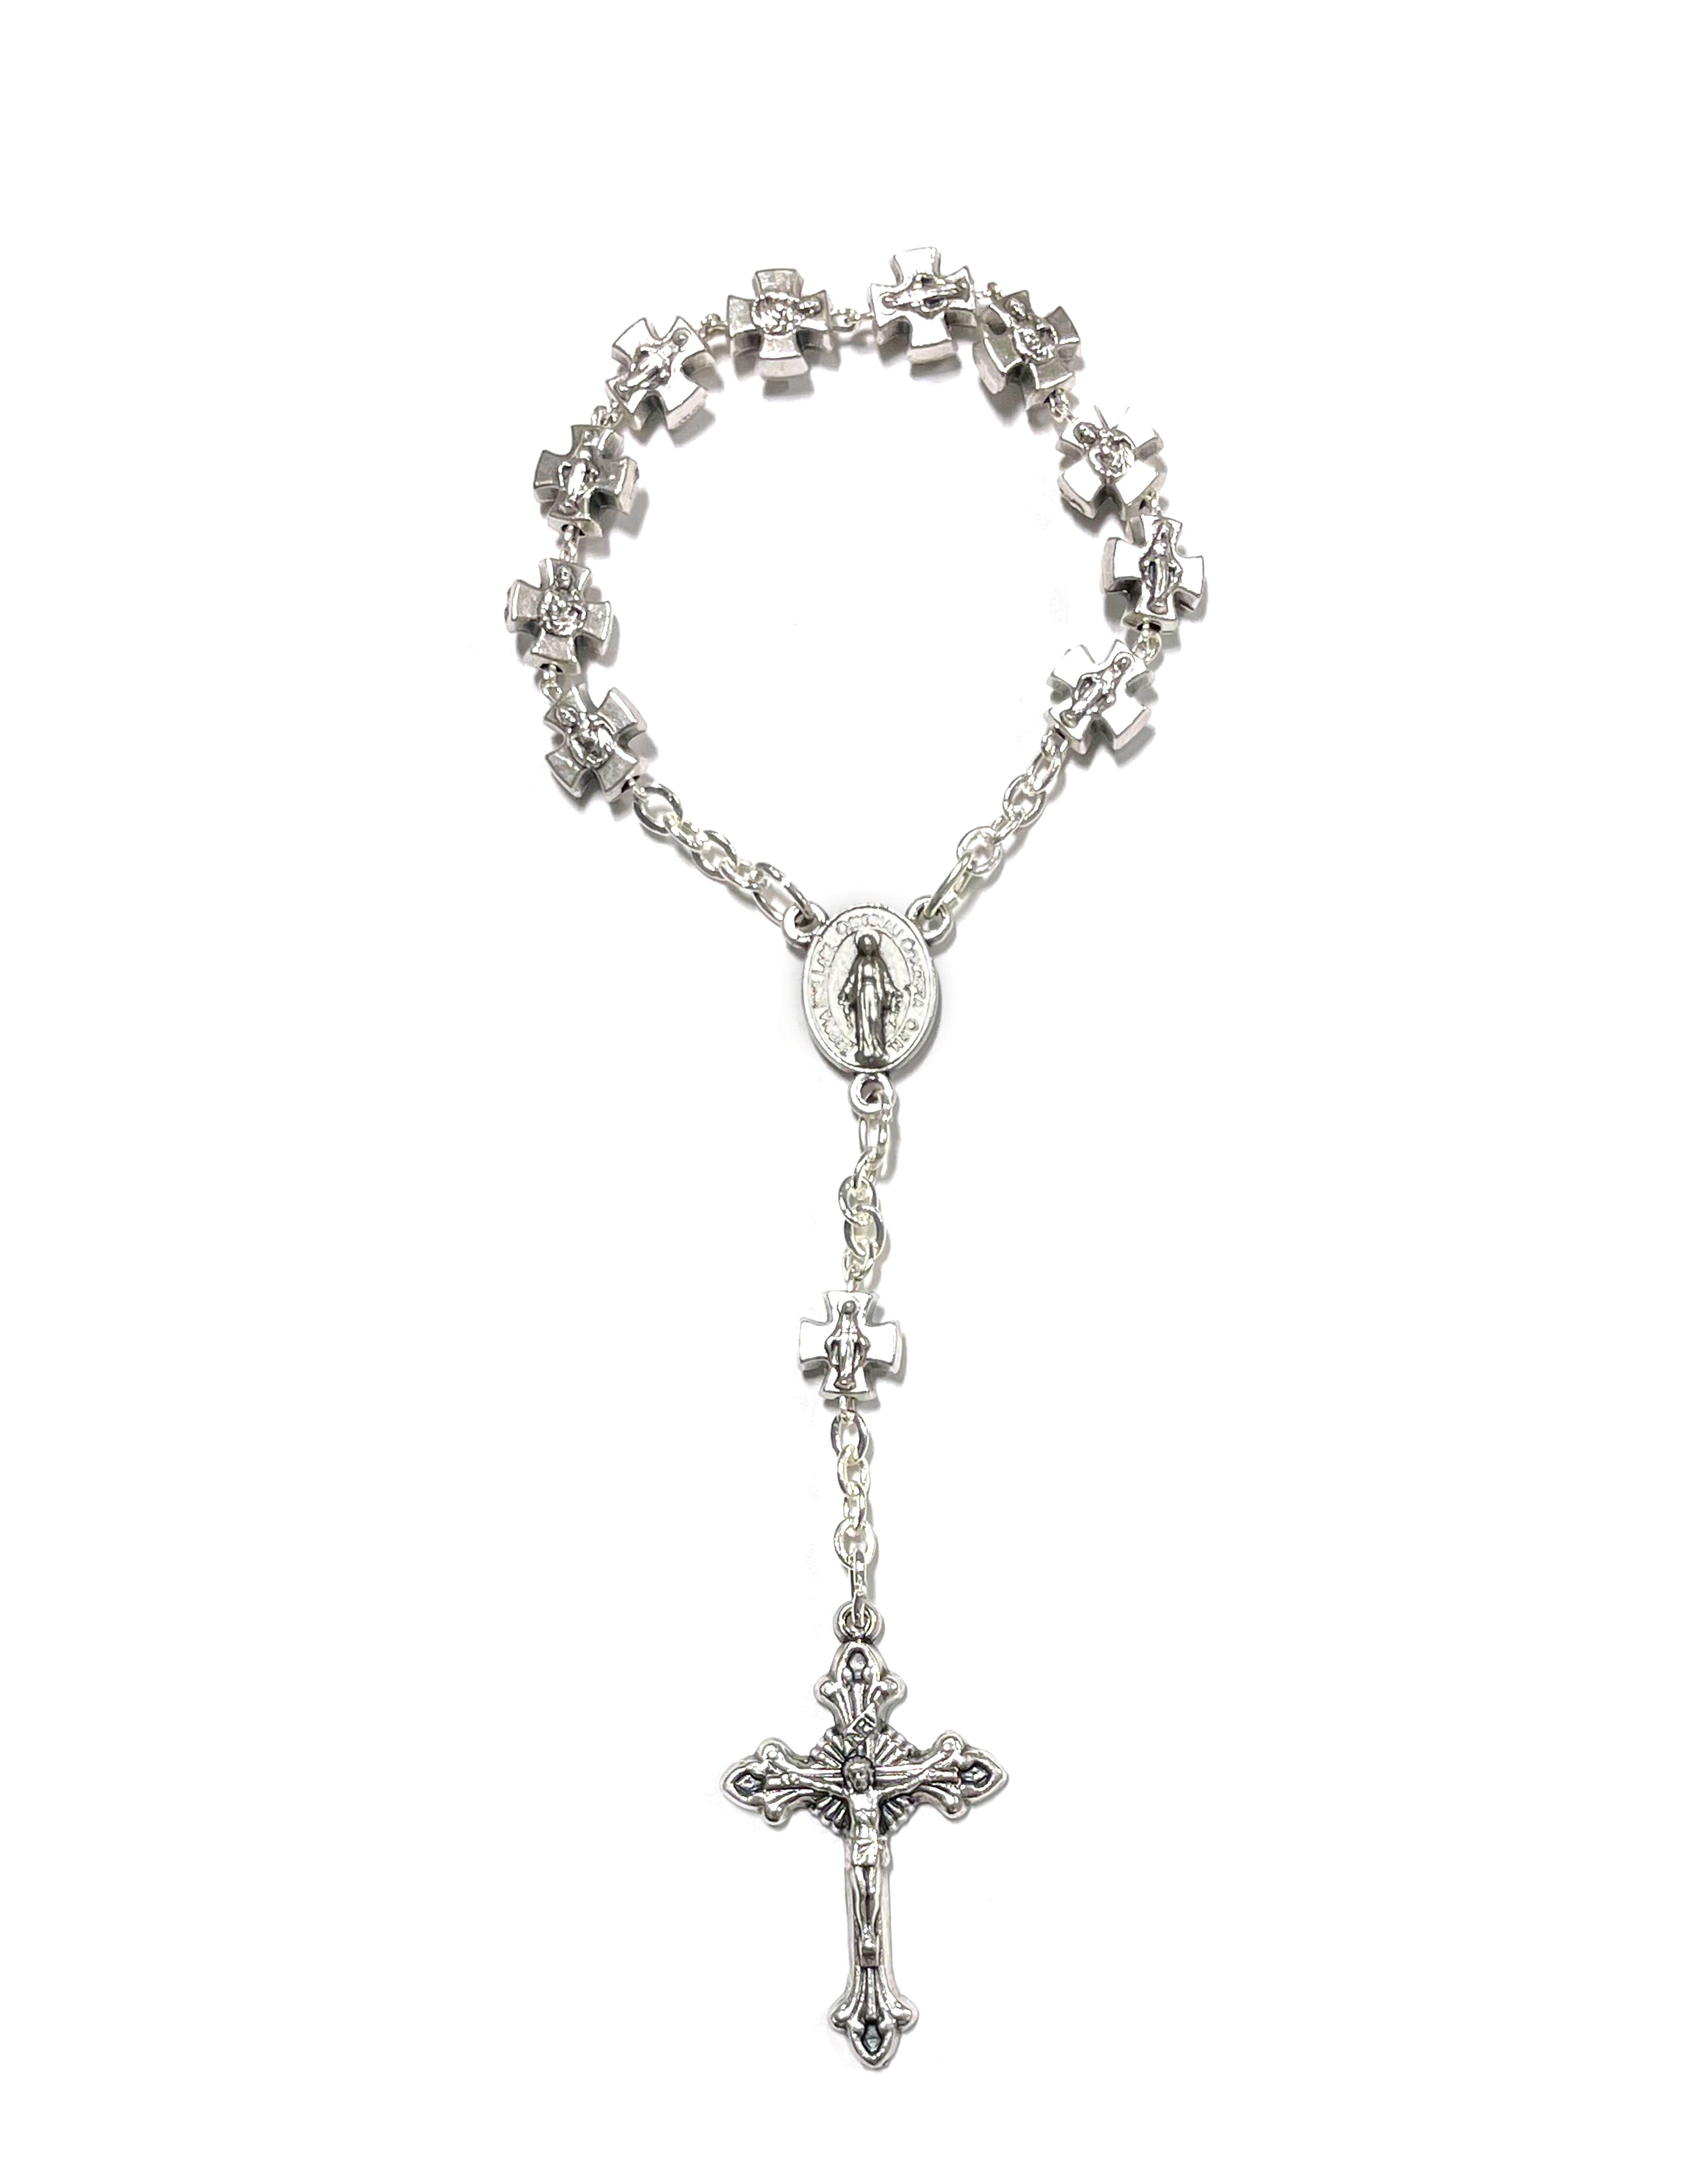 Decade of the Miraculous medal with beads in form of crosses